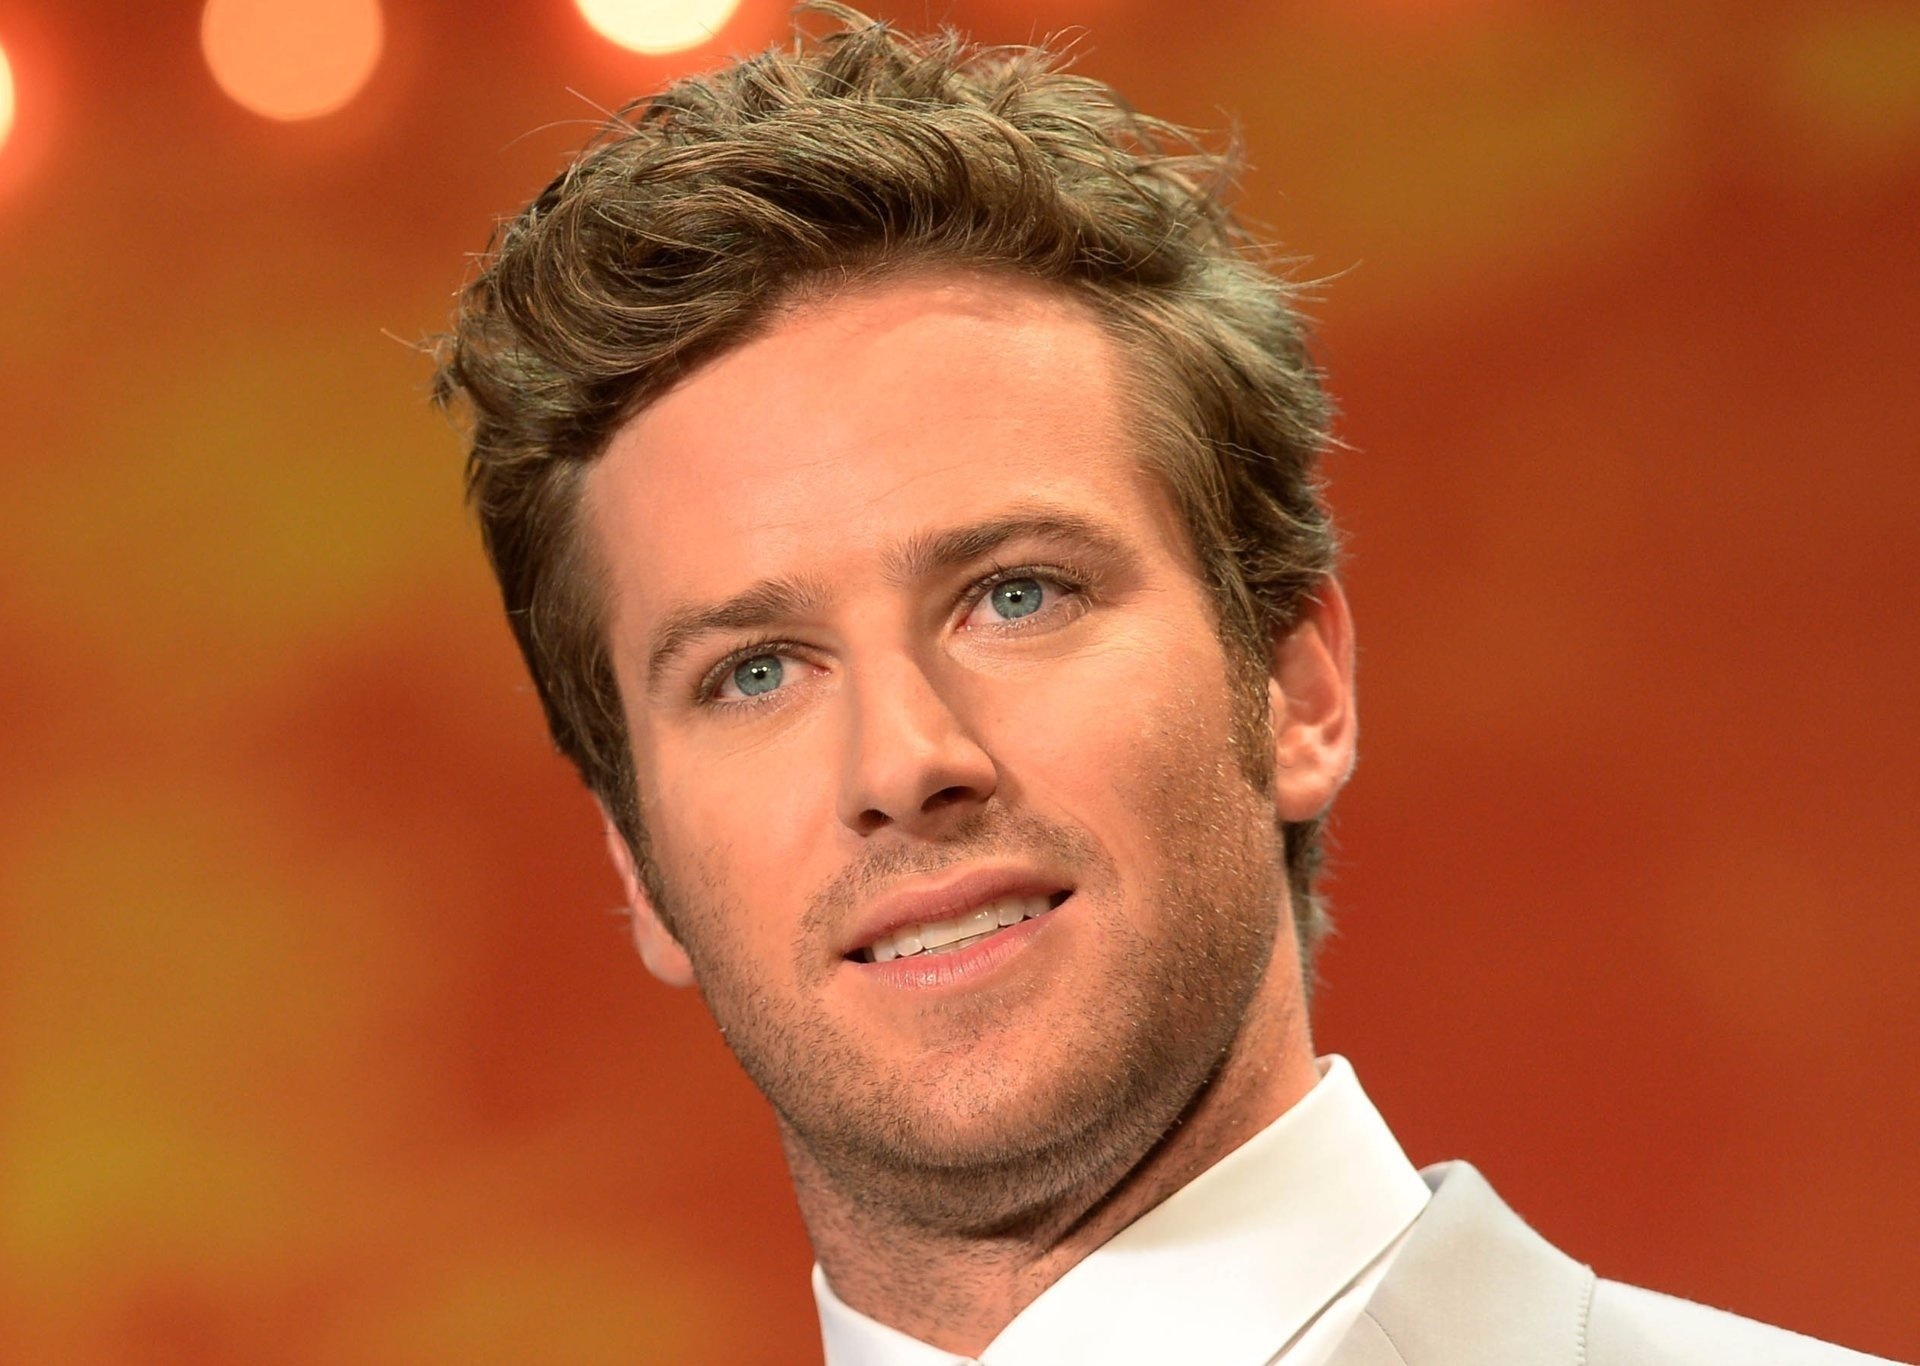 Armie Hammer movies, HD wallpapers, Actor background, High-resolution images, 1920x1370 HD Desktop